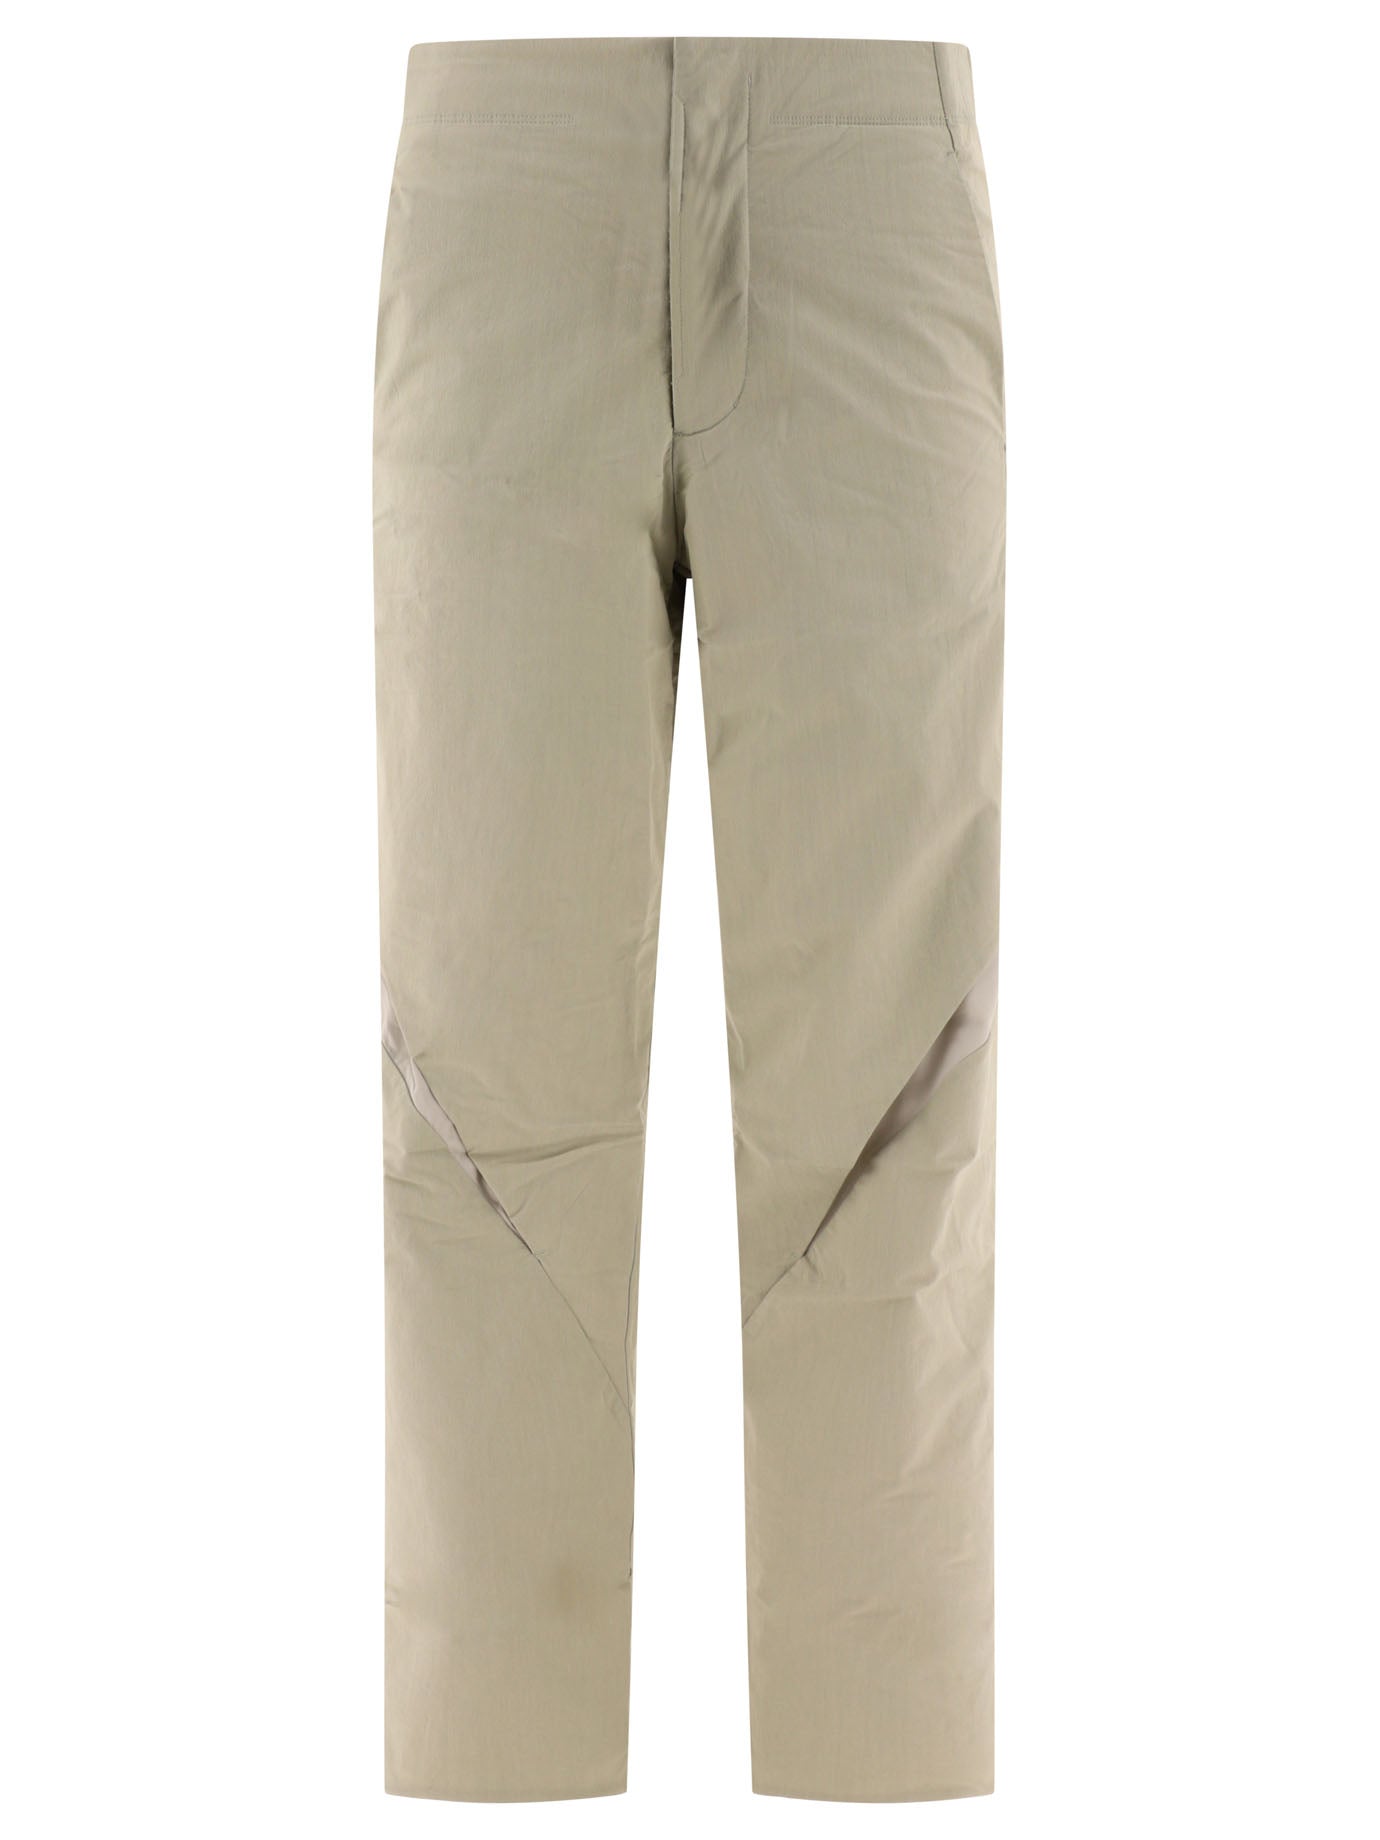 Post Archive Faction (paf) 6.0 Center Trousers Grey In Neutral